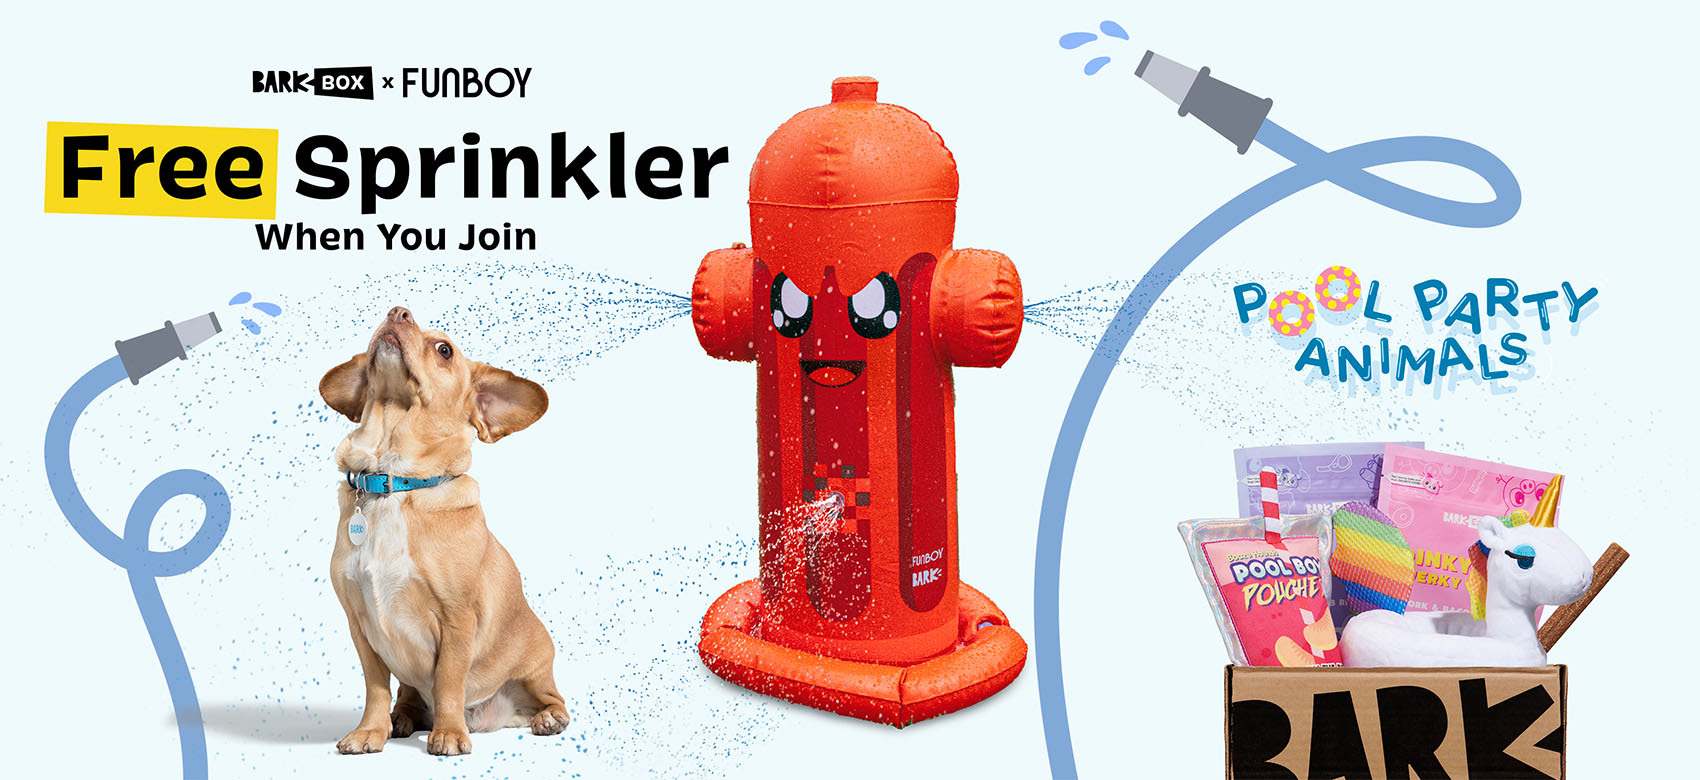 BARKBOX x FUNBOY - Free Sprinkler When You Join - $59 VALUE - POOL PARTY ANIMALS